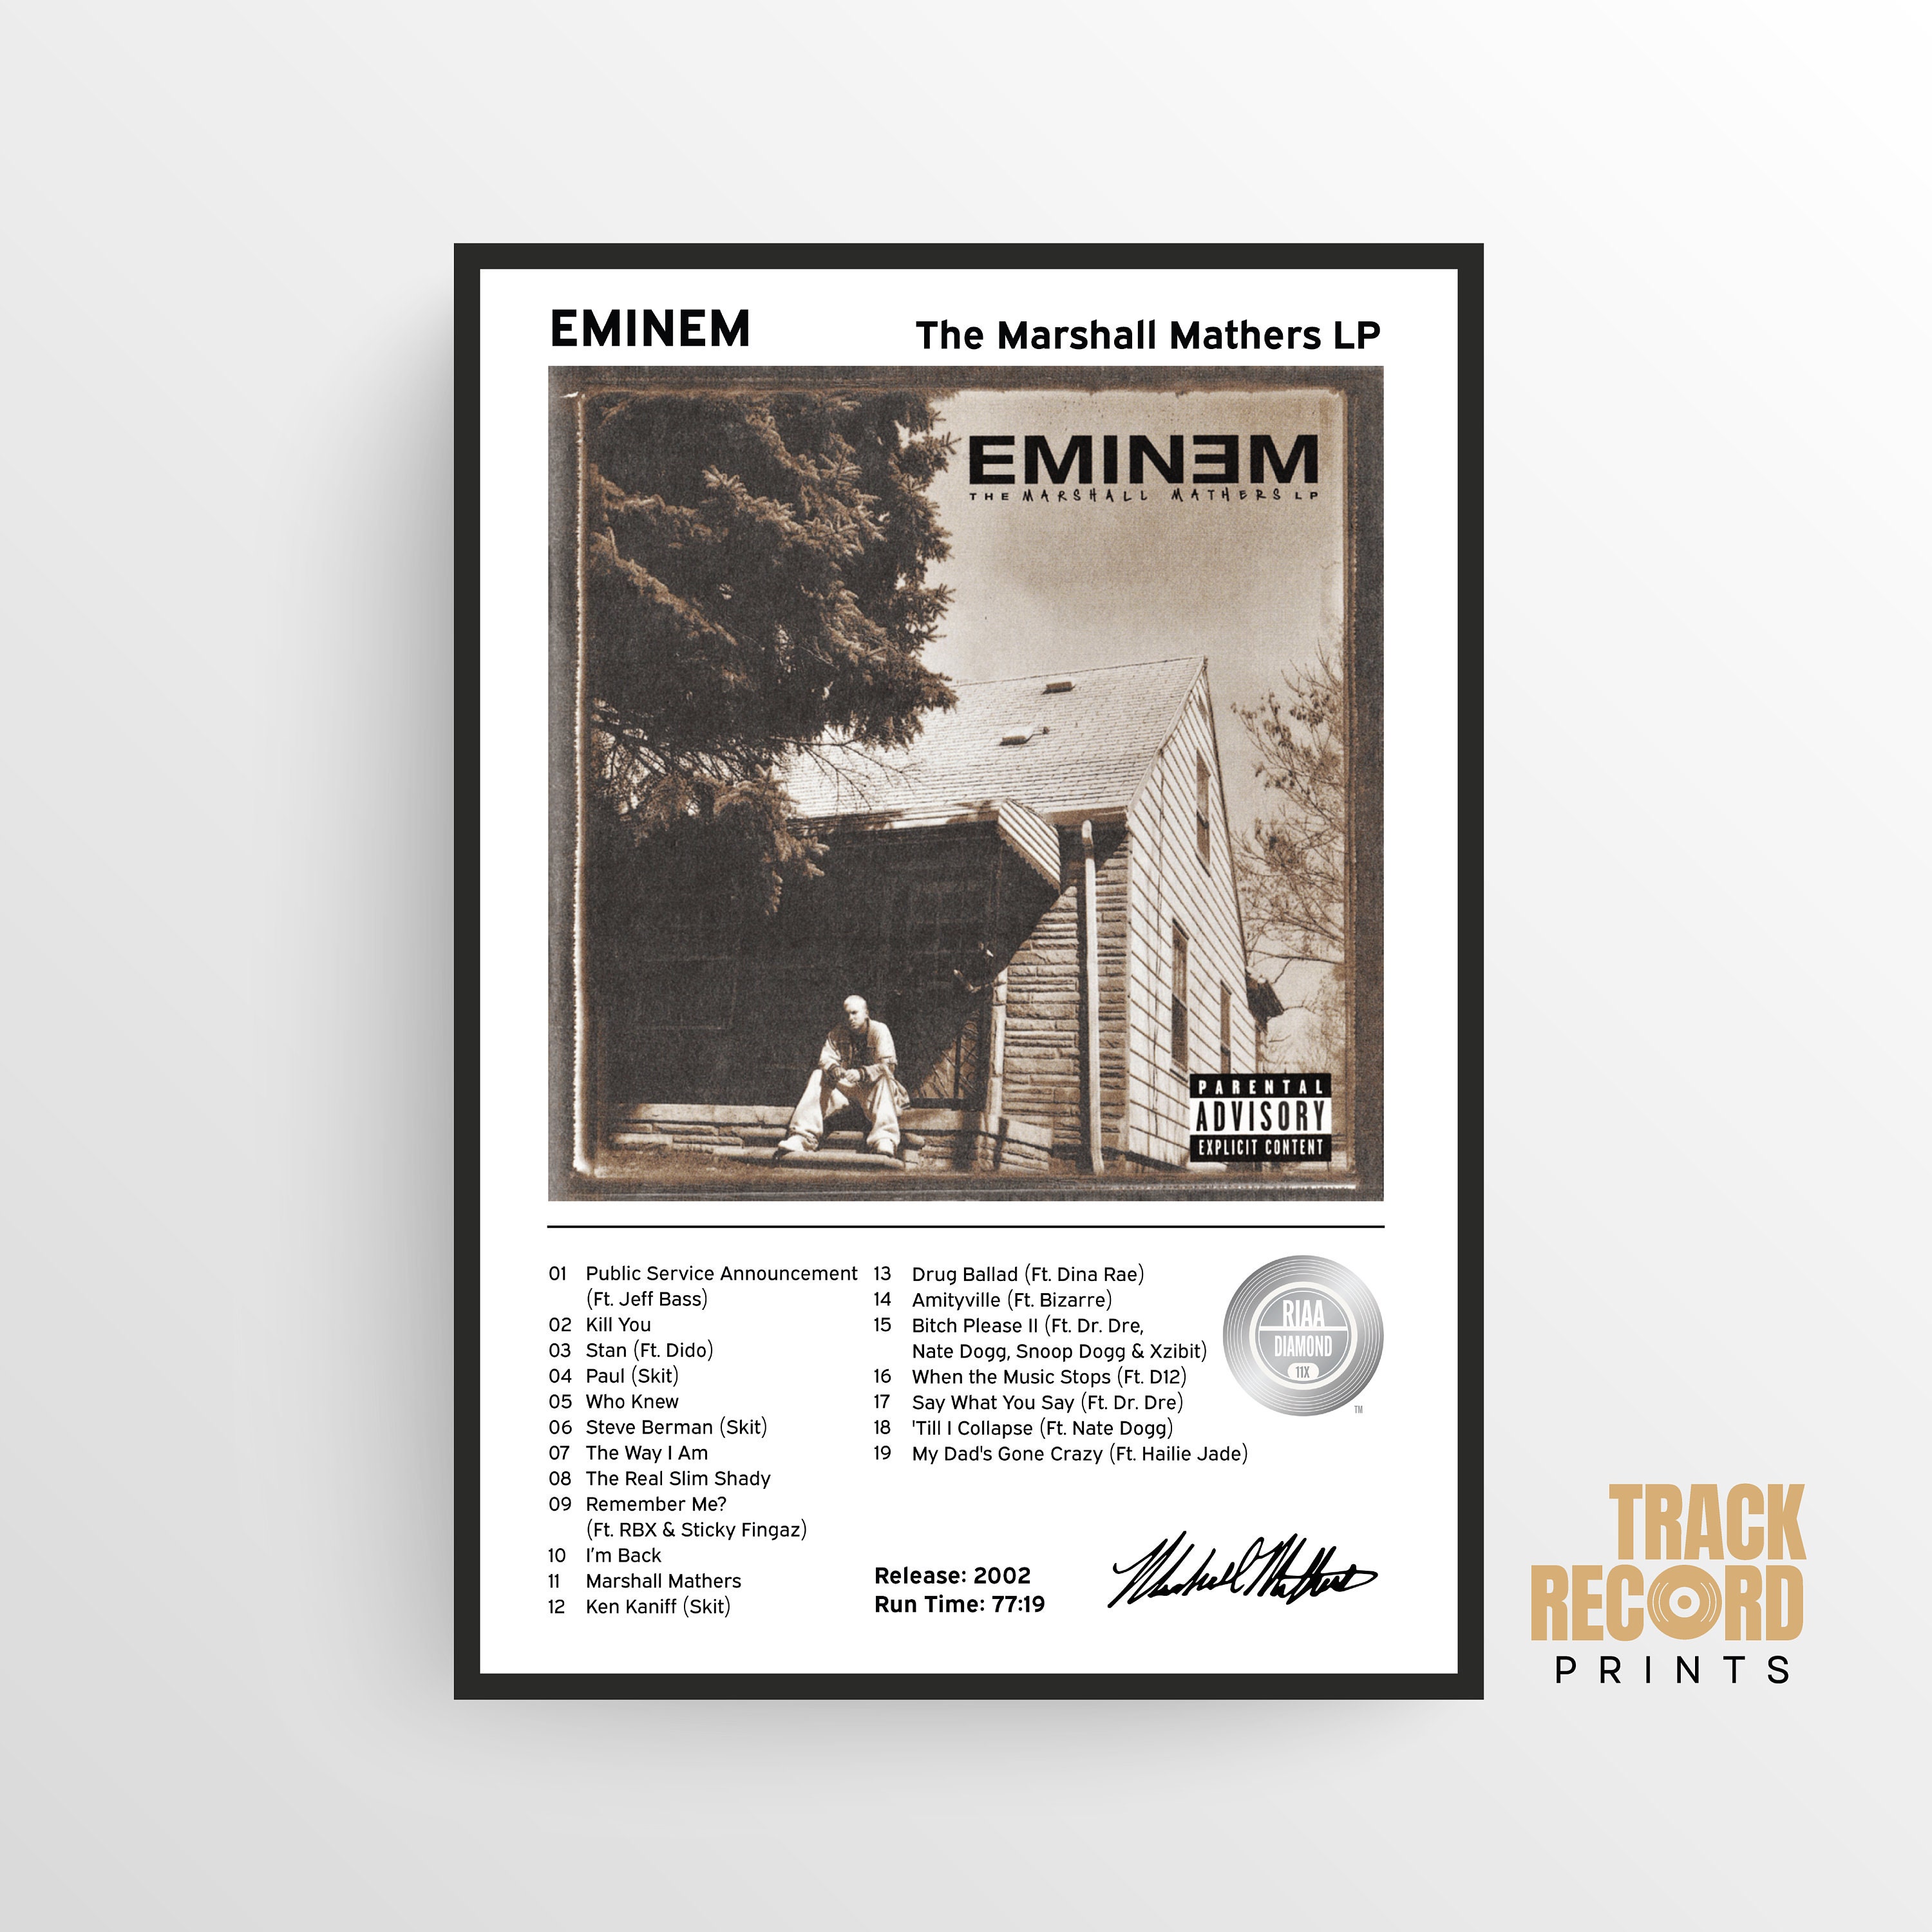 Eminem Poster Print, Music Poster sold by Chris Goodwin | SKU 46018515 |  60% OFF Printerval